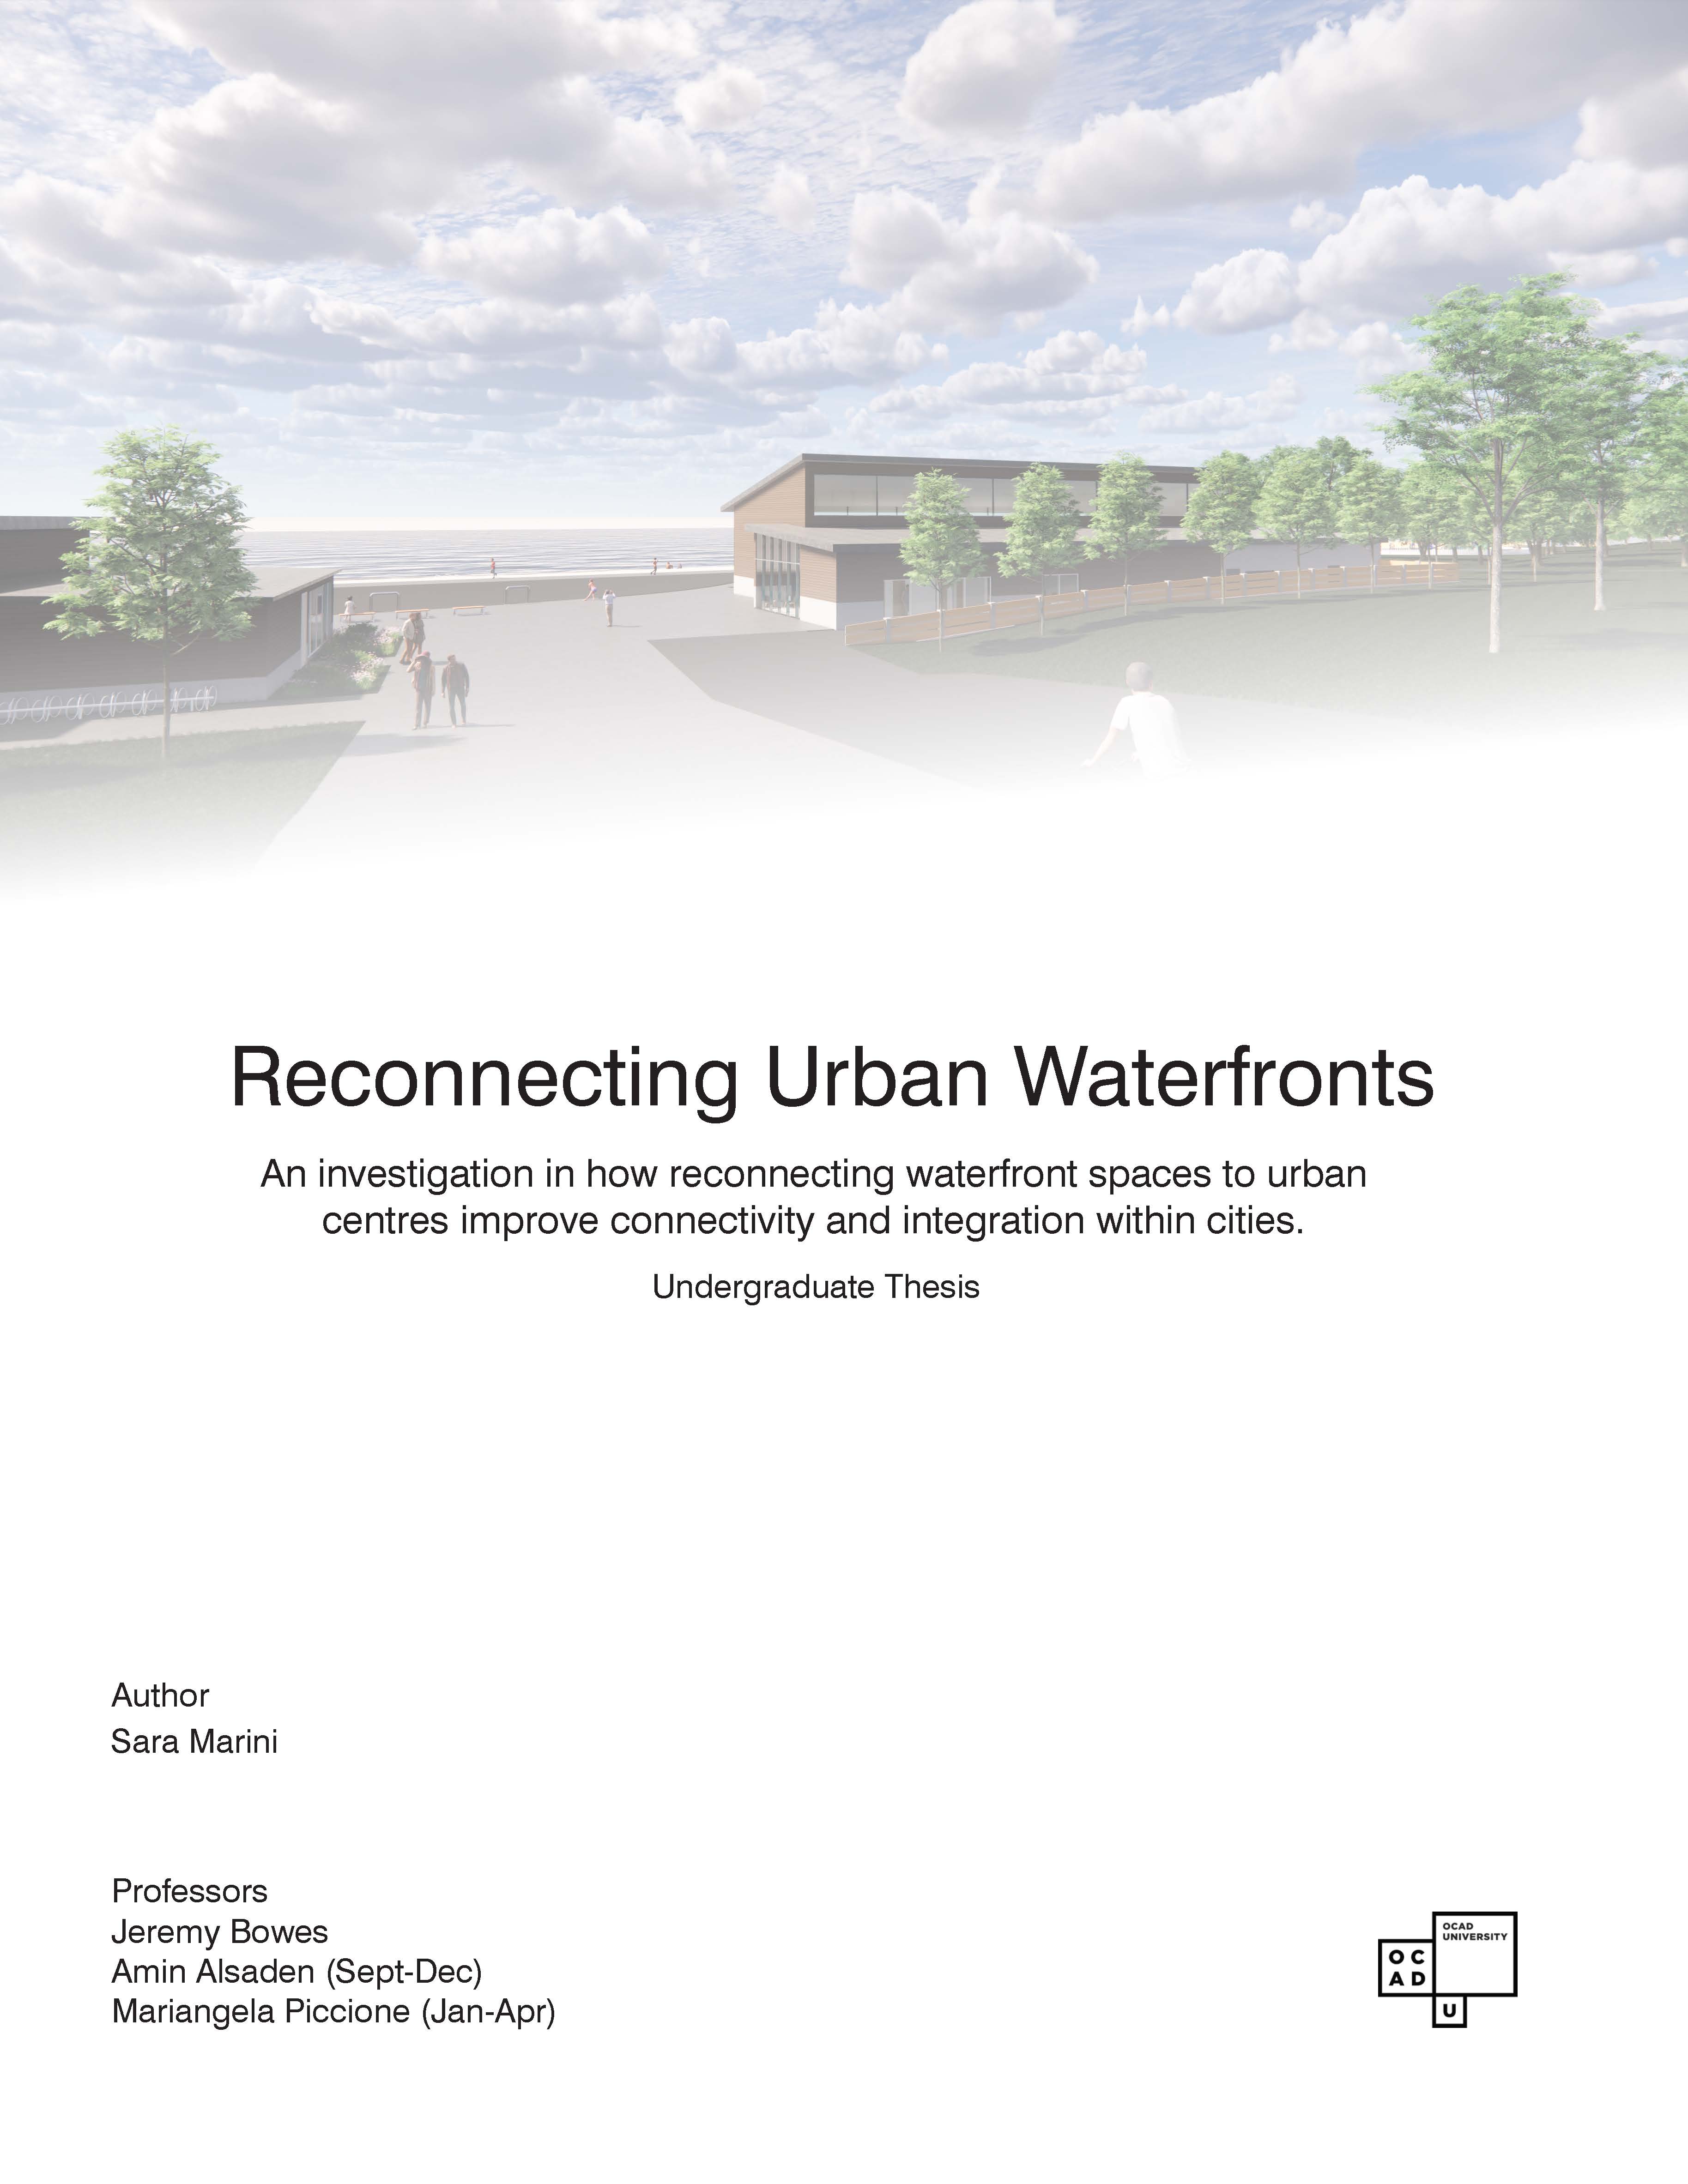 Reconnecting Urban Waterfronts